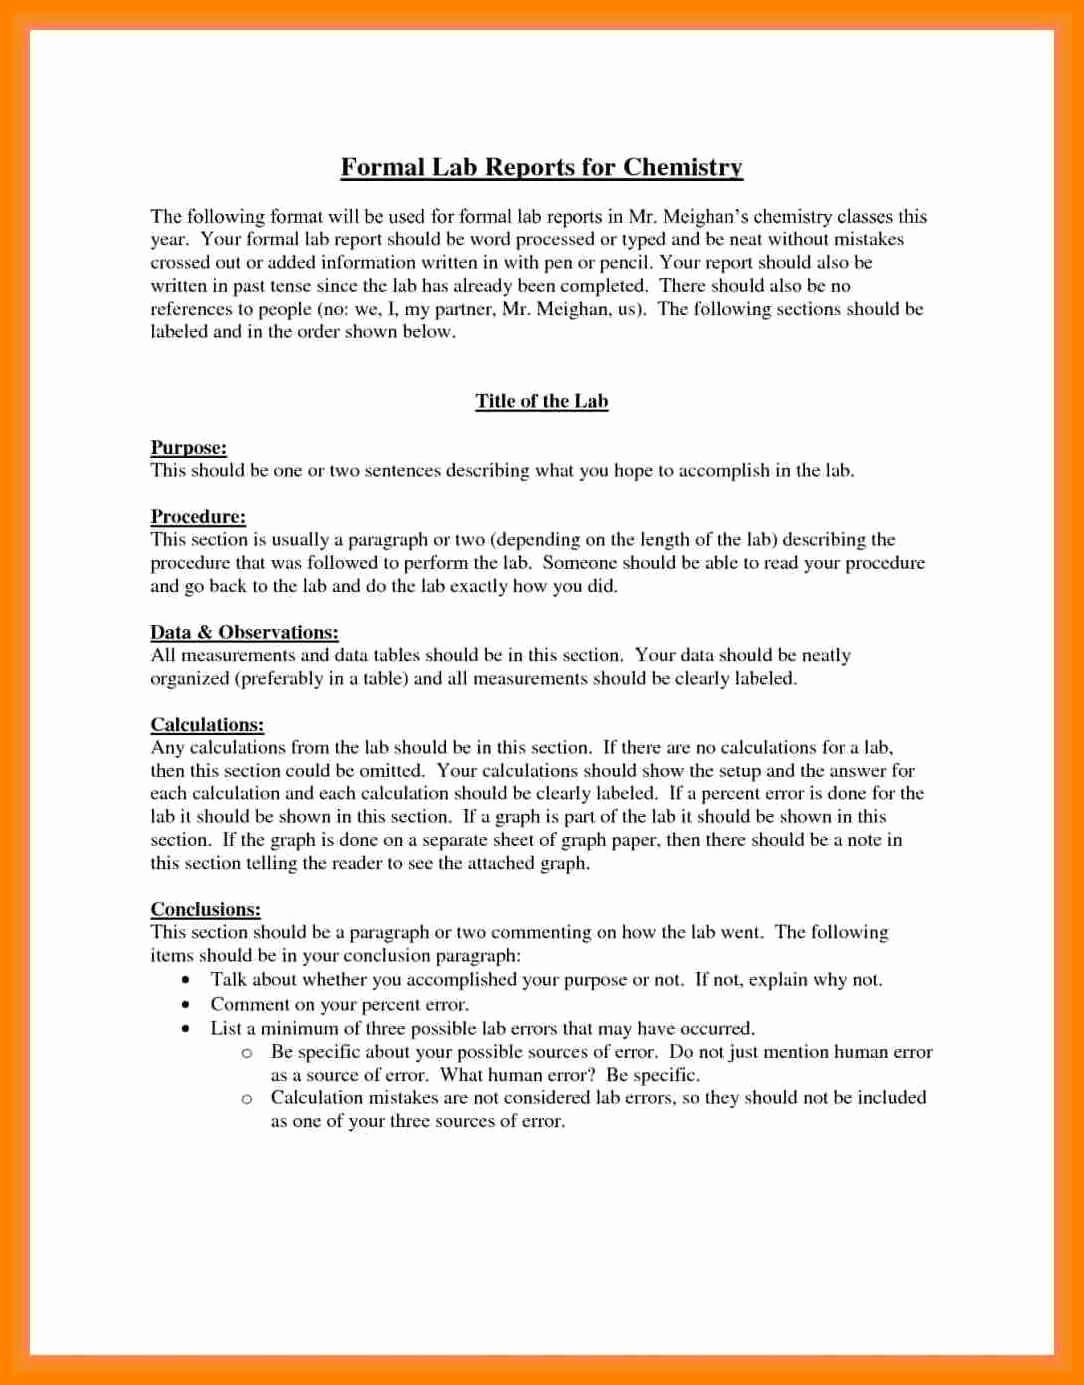 003 Formal Lab Report Example Best Write Up Template Of For Formal Lab Report Template